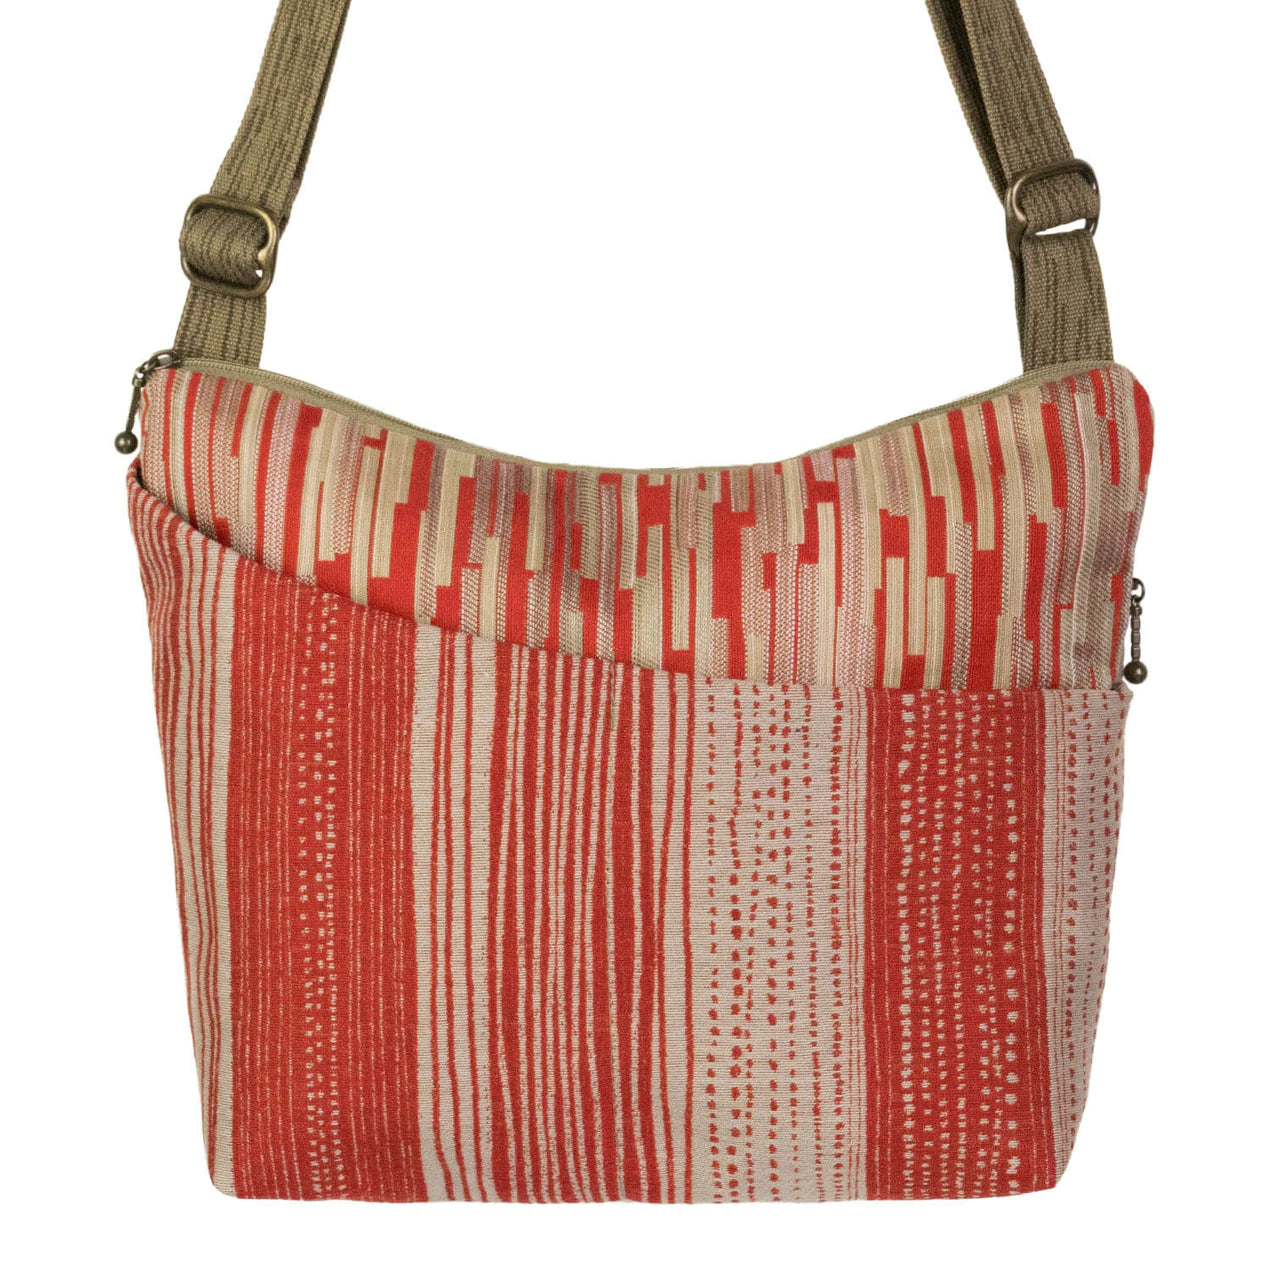 Maruca Cottage Bag - The perfect everyday bag for those who prefer a horizontal shap.